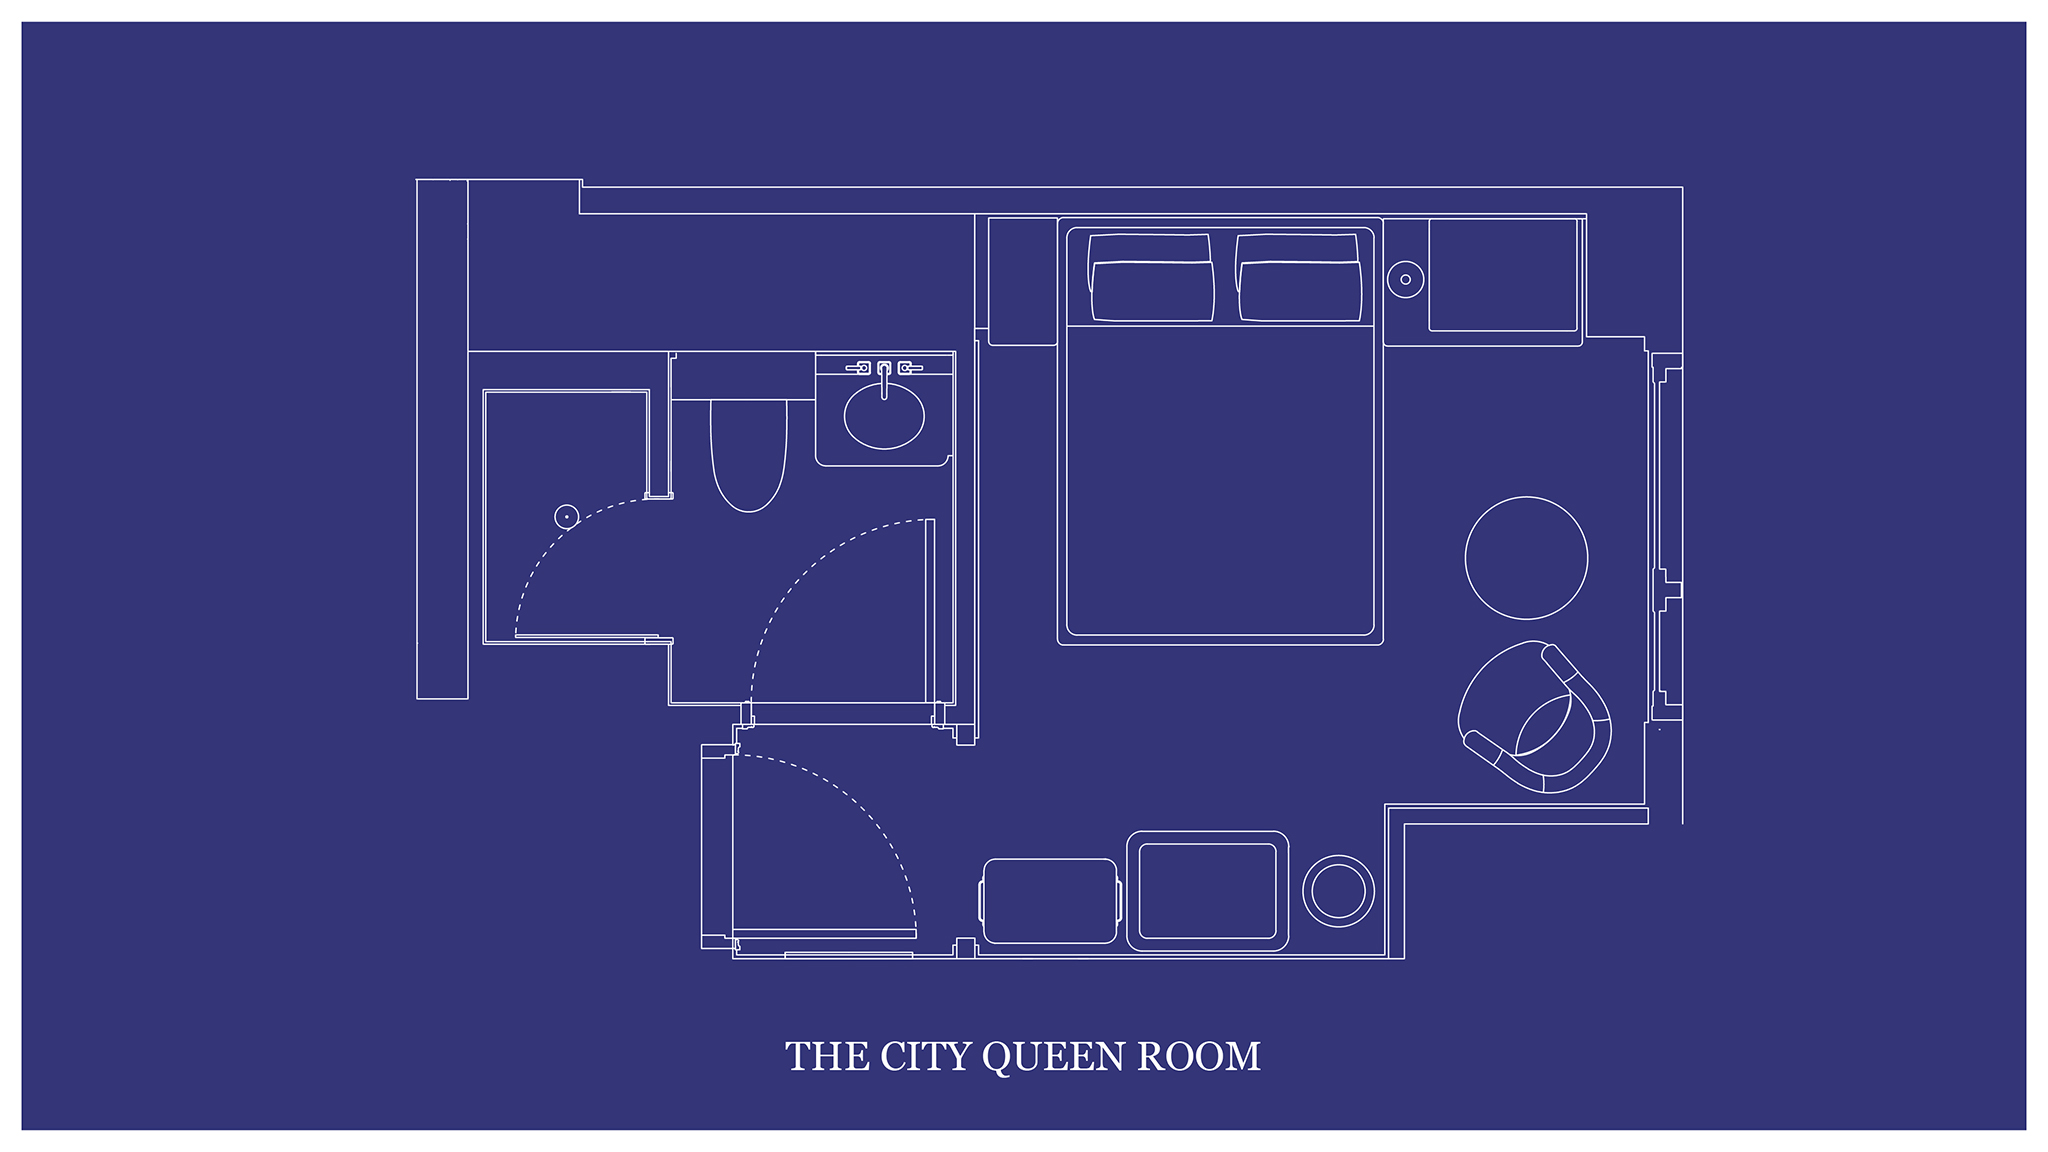 Architectural layout map of "THE CITY QUEEN ROOM" presented in blueprints.